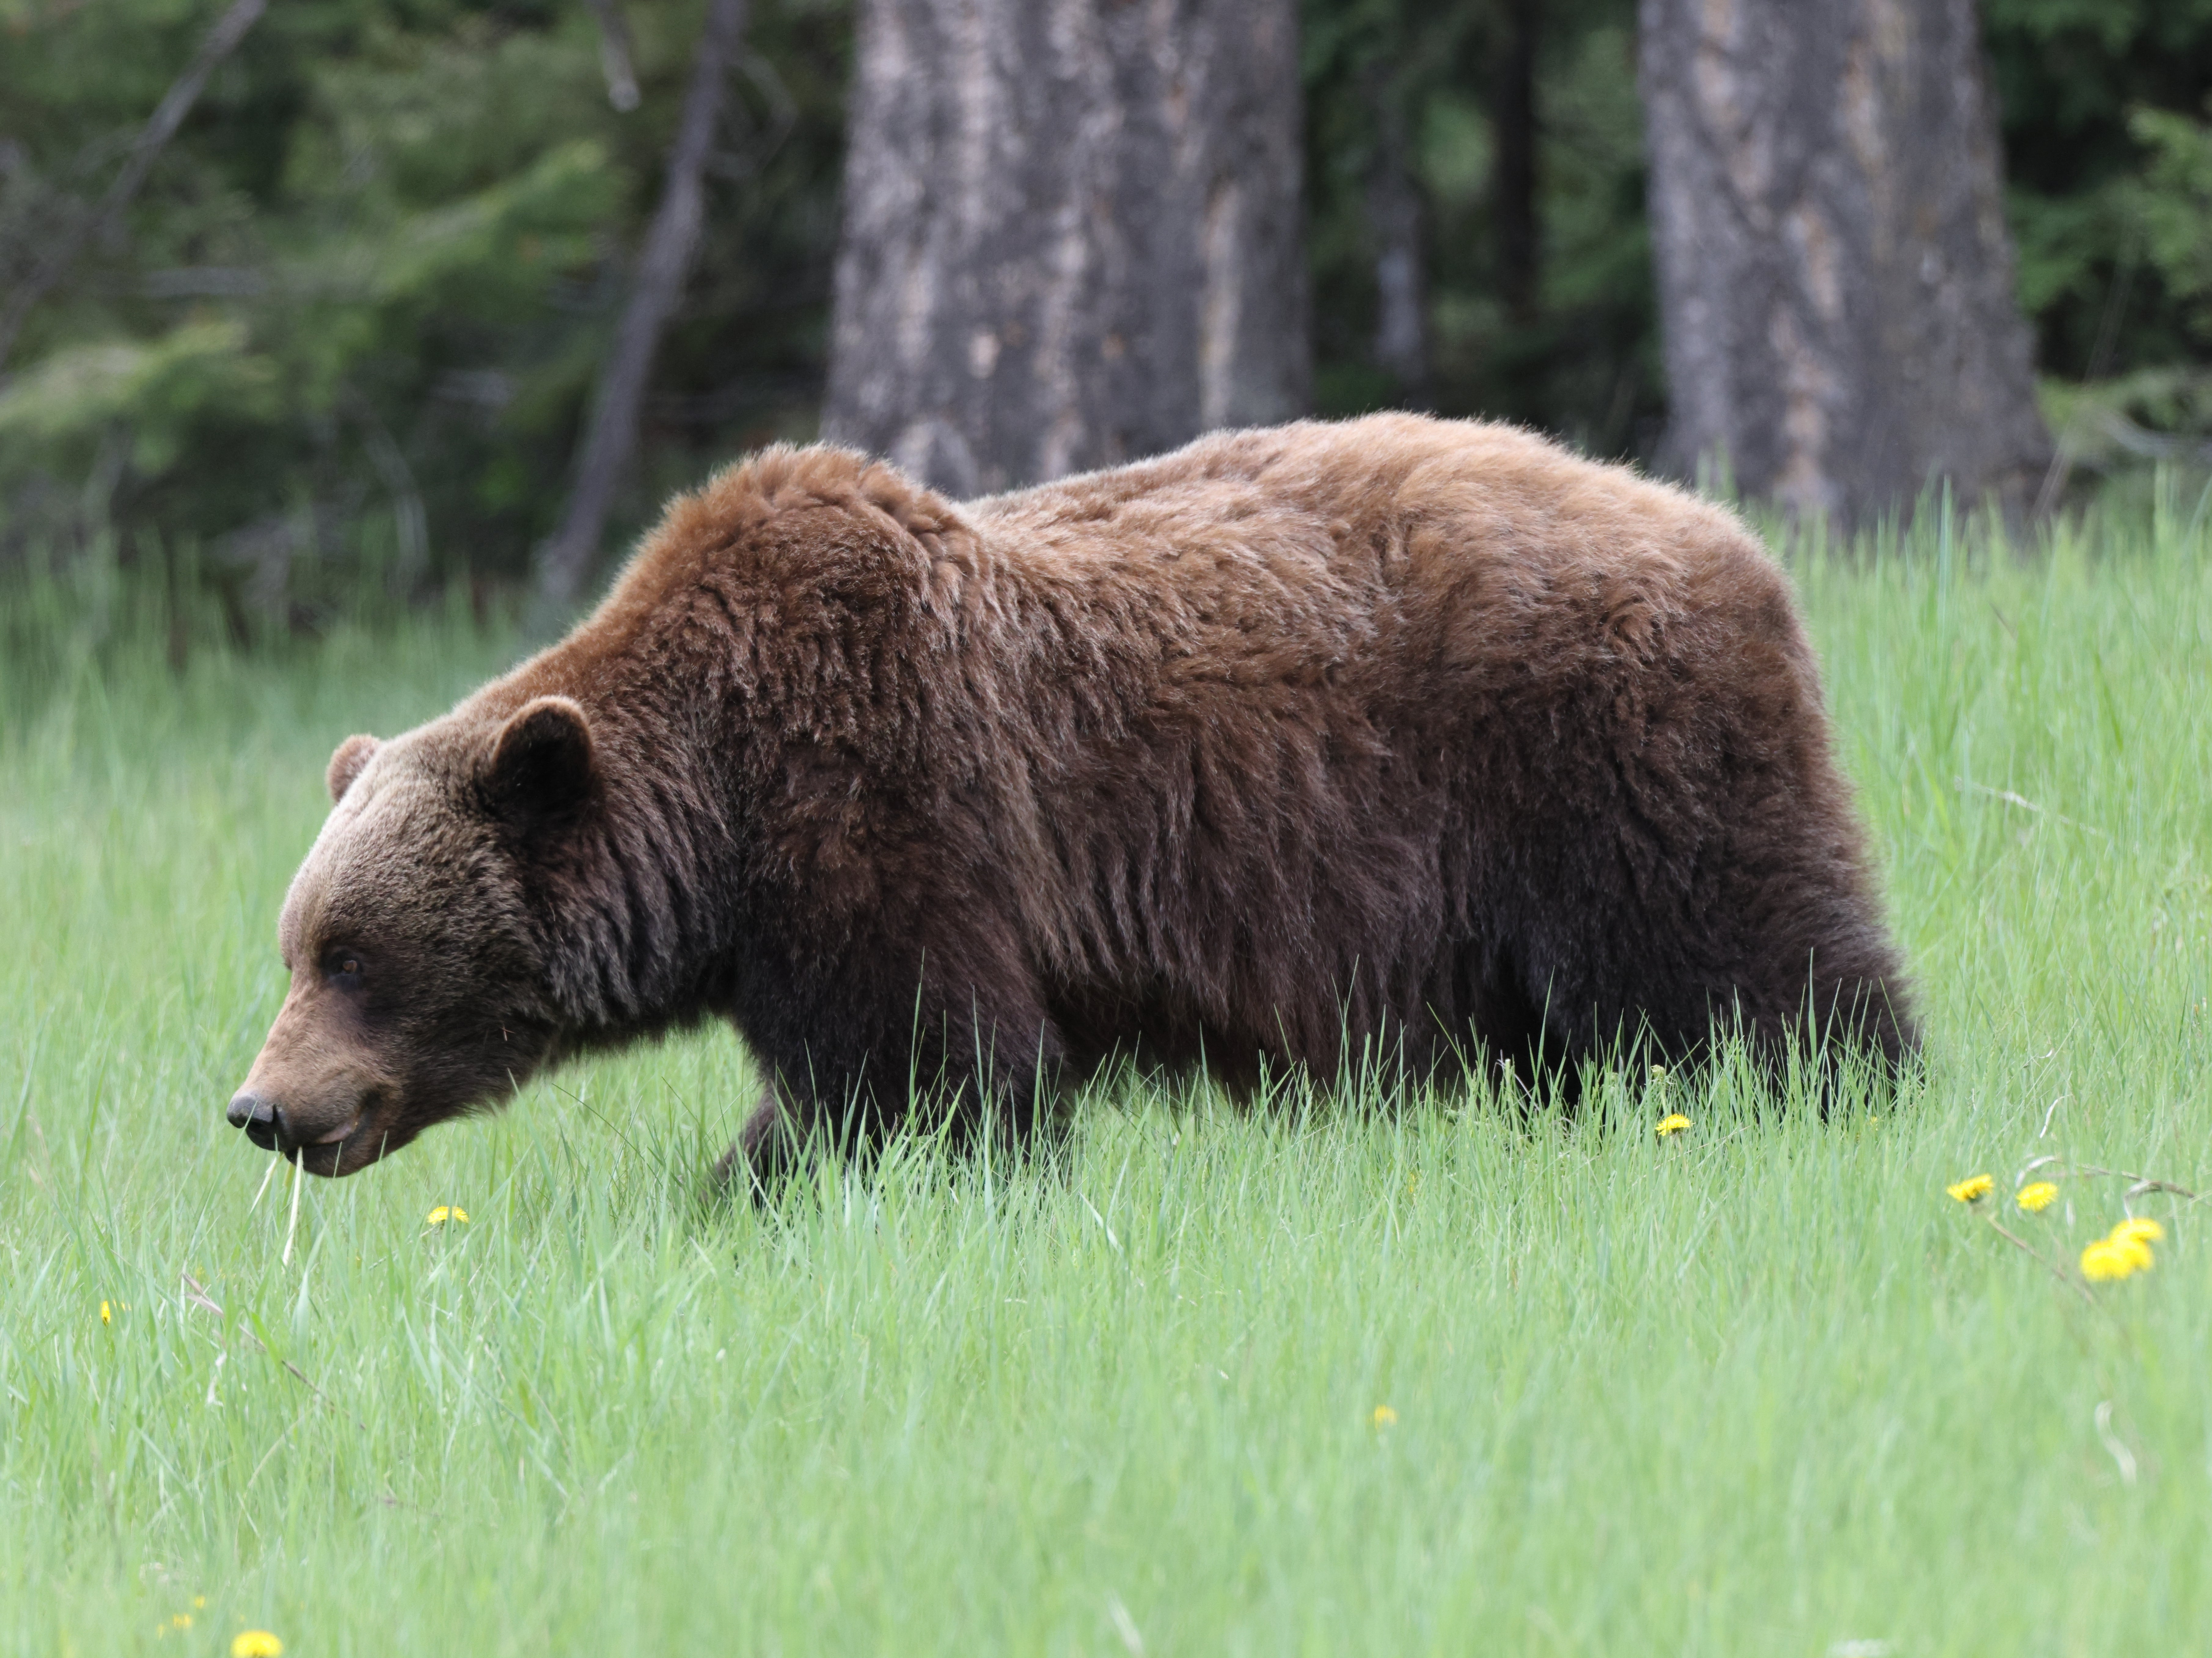 The last time a grizzly bear was seen in the region was in 1996